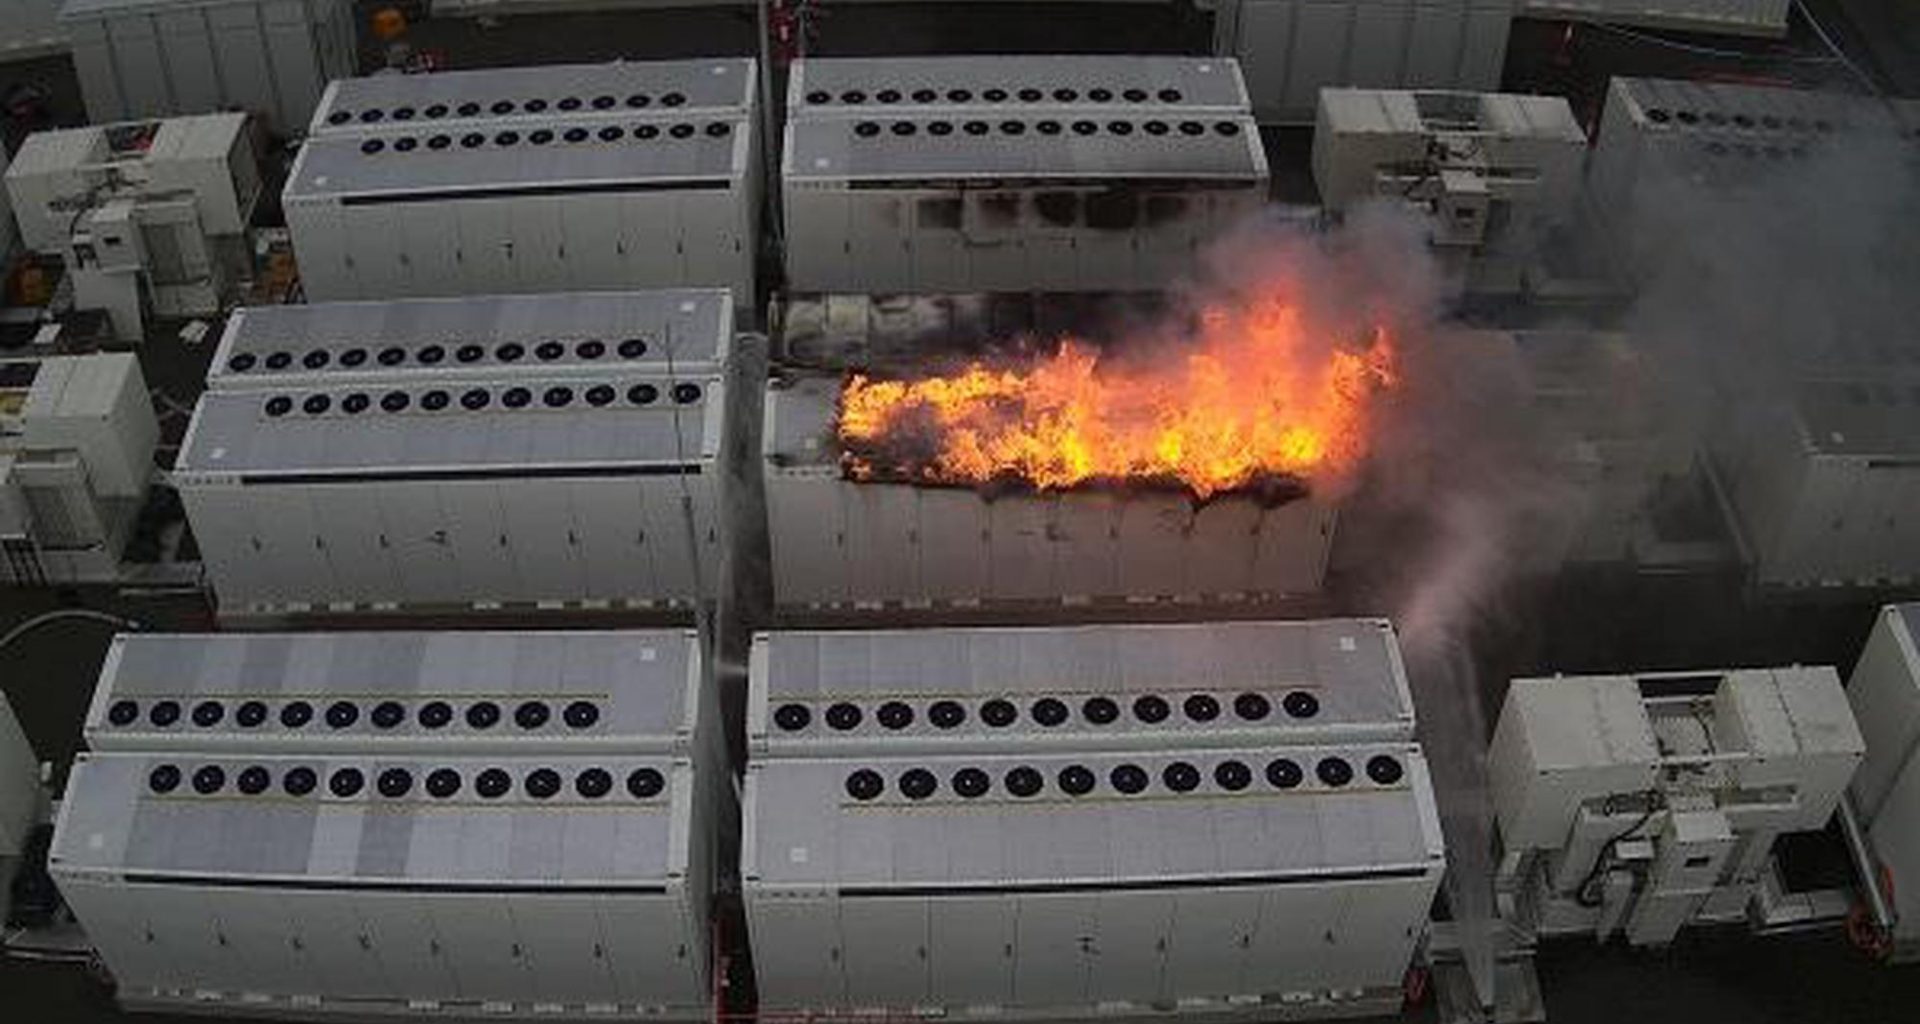 Tesla battery burns for three days - 150 firefighters are on site